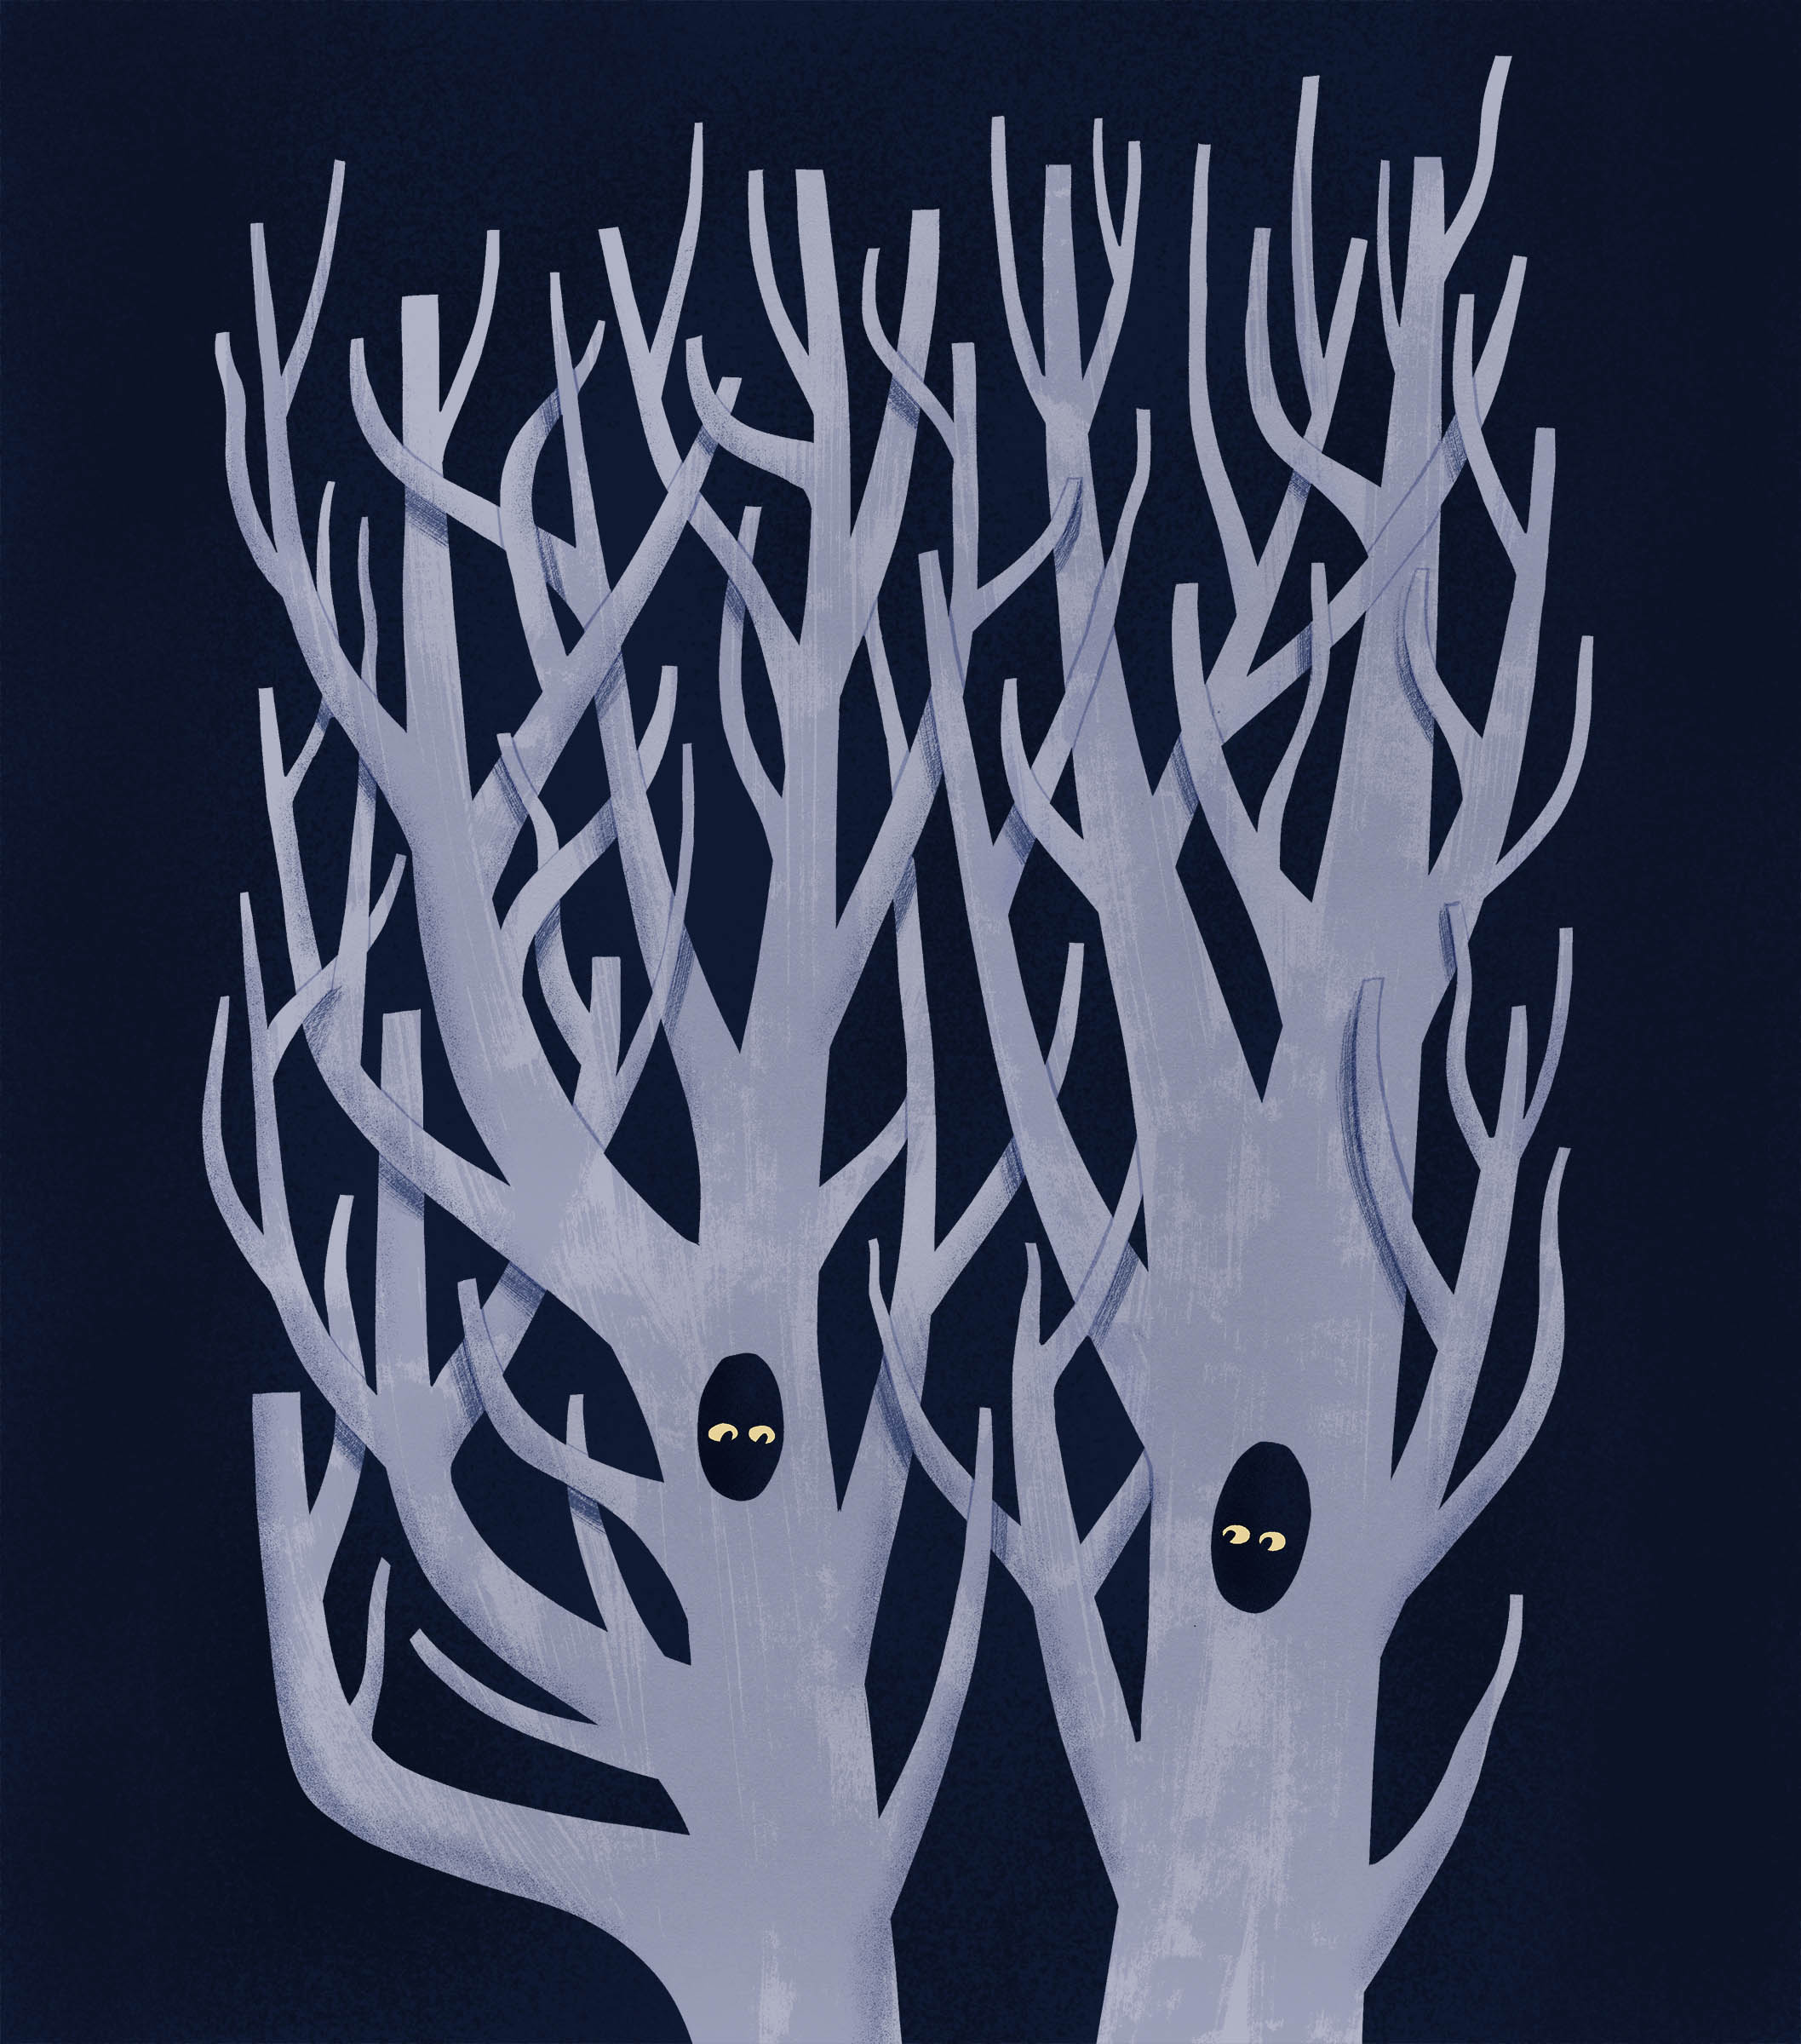 Two trees with tangled branches. Each tree contain a hole where two set of eyes are peeking out.